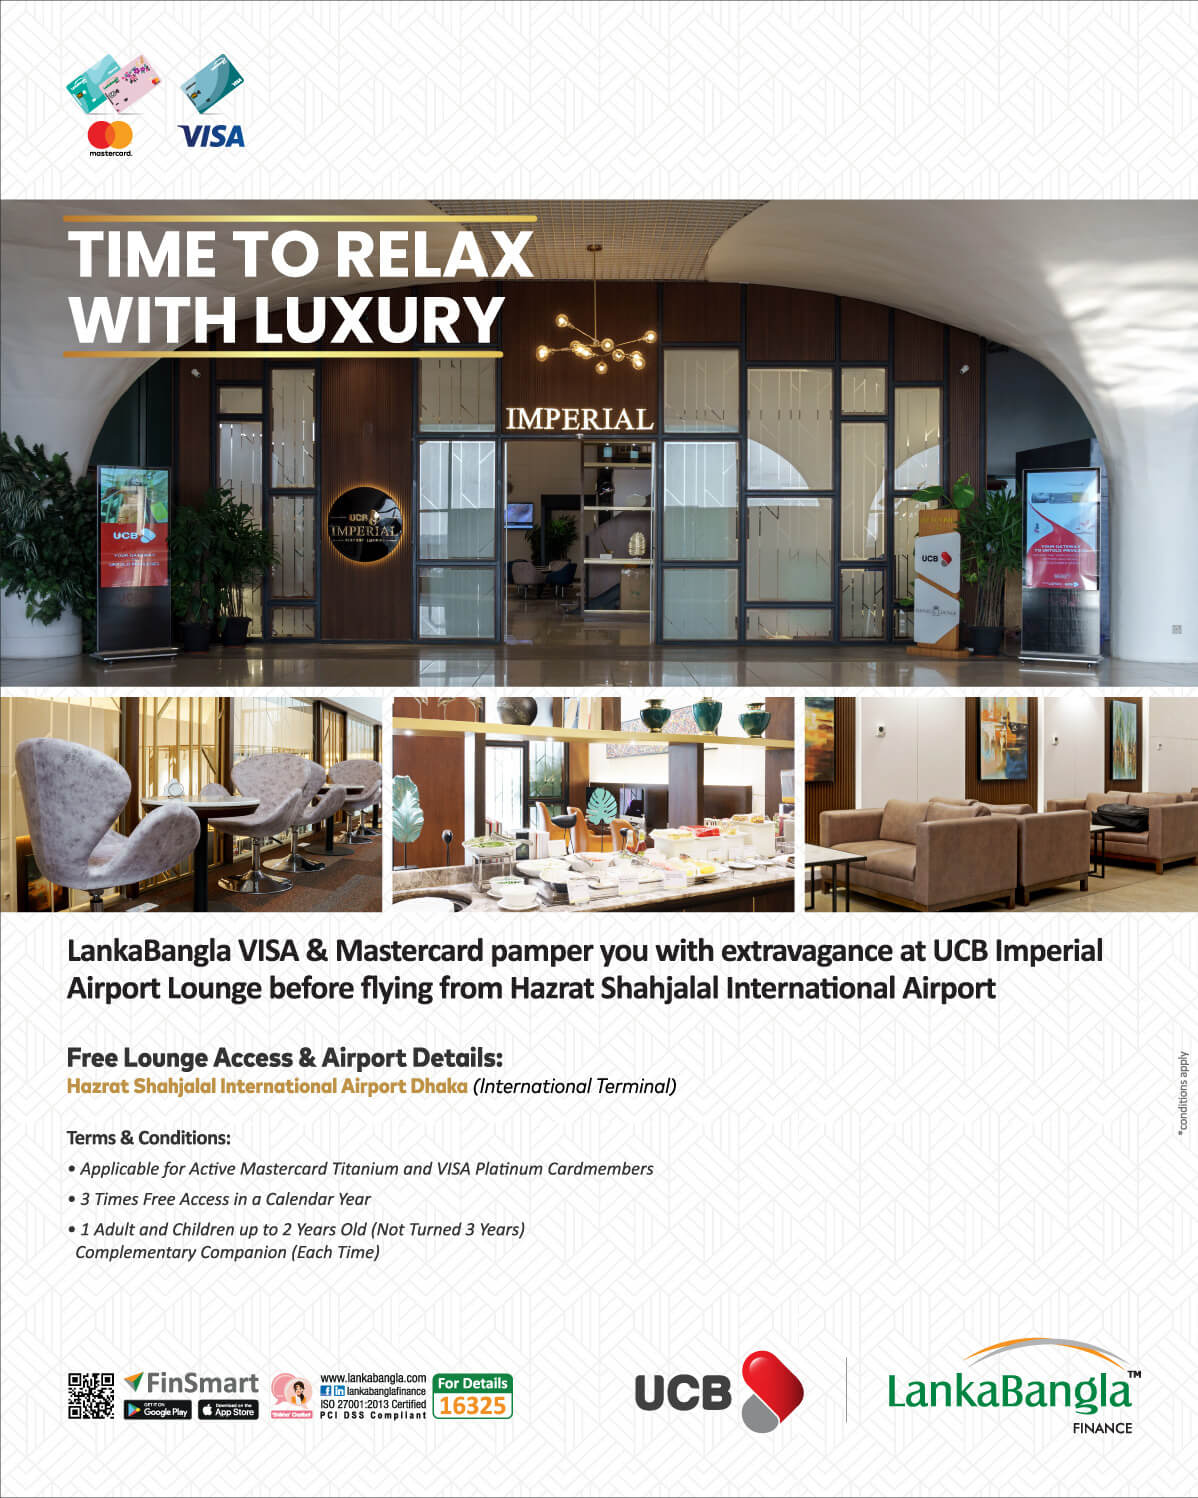 LBFL Offer at UCB Imperial Airport Lounge